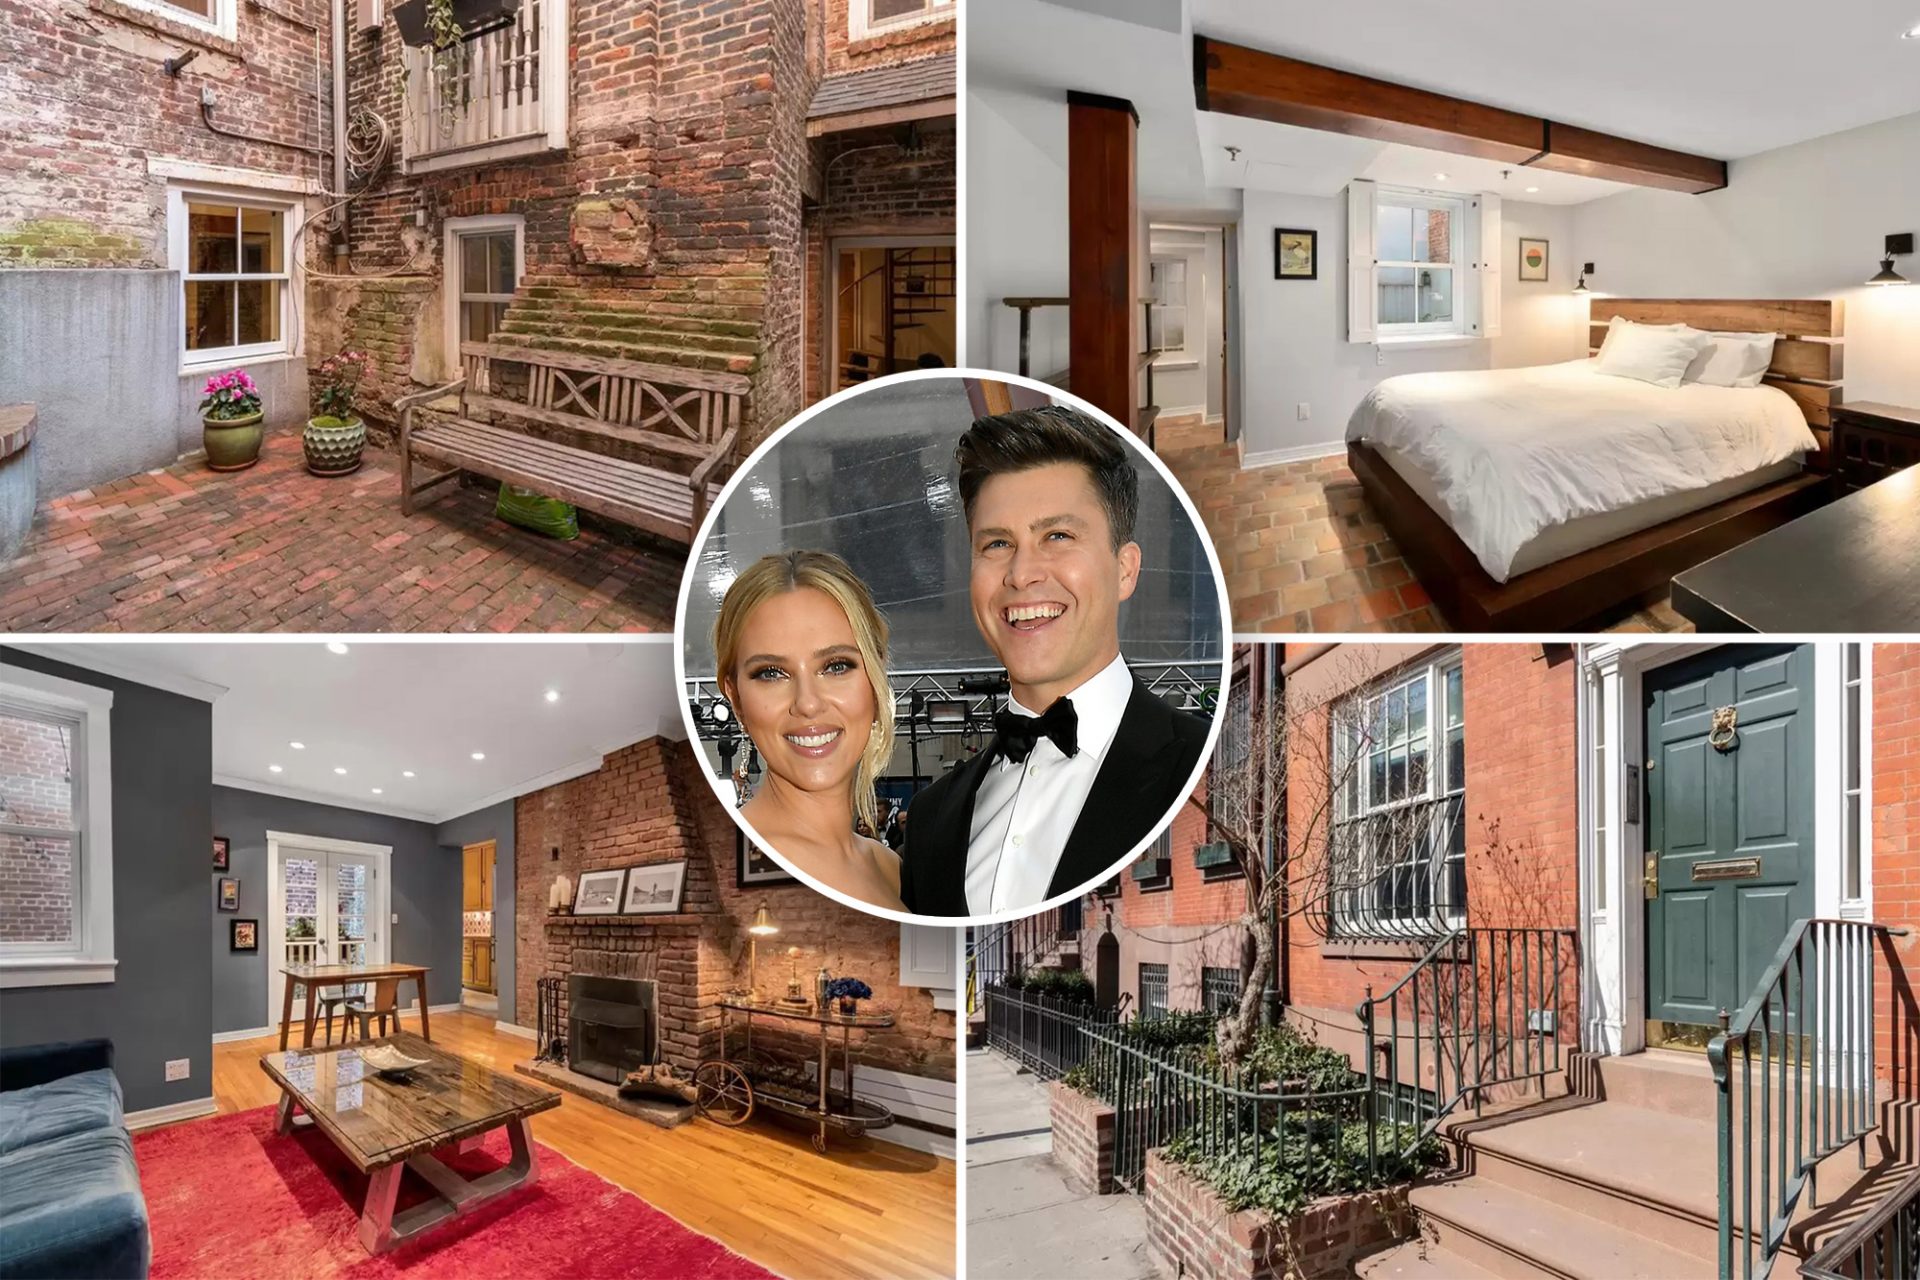 ‘SNL’ vital particular person Colin Jost asks $2.5M for downtown duplex amid rising family